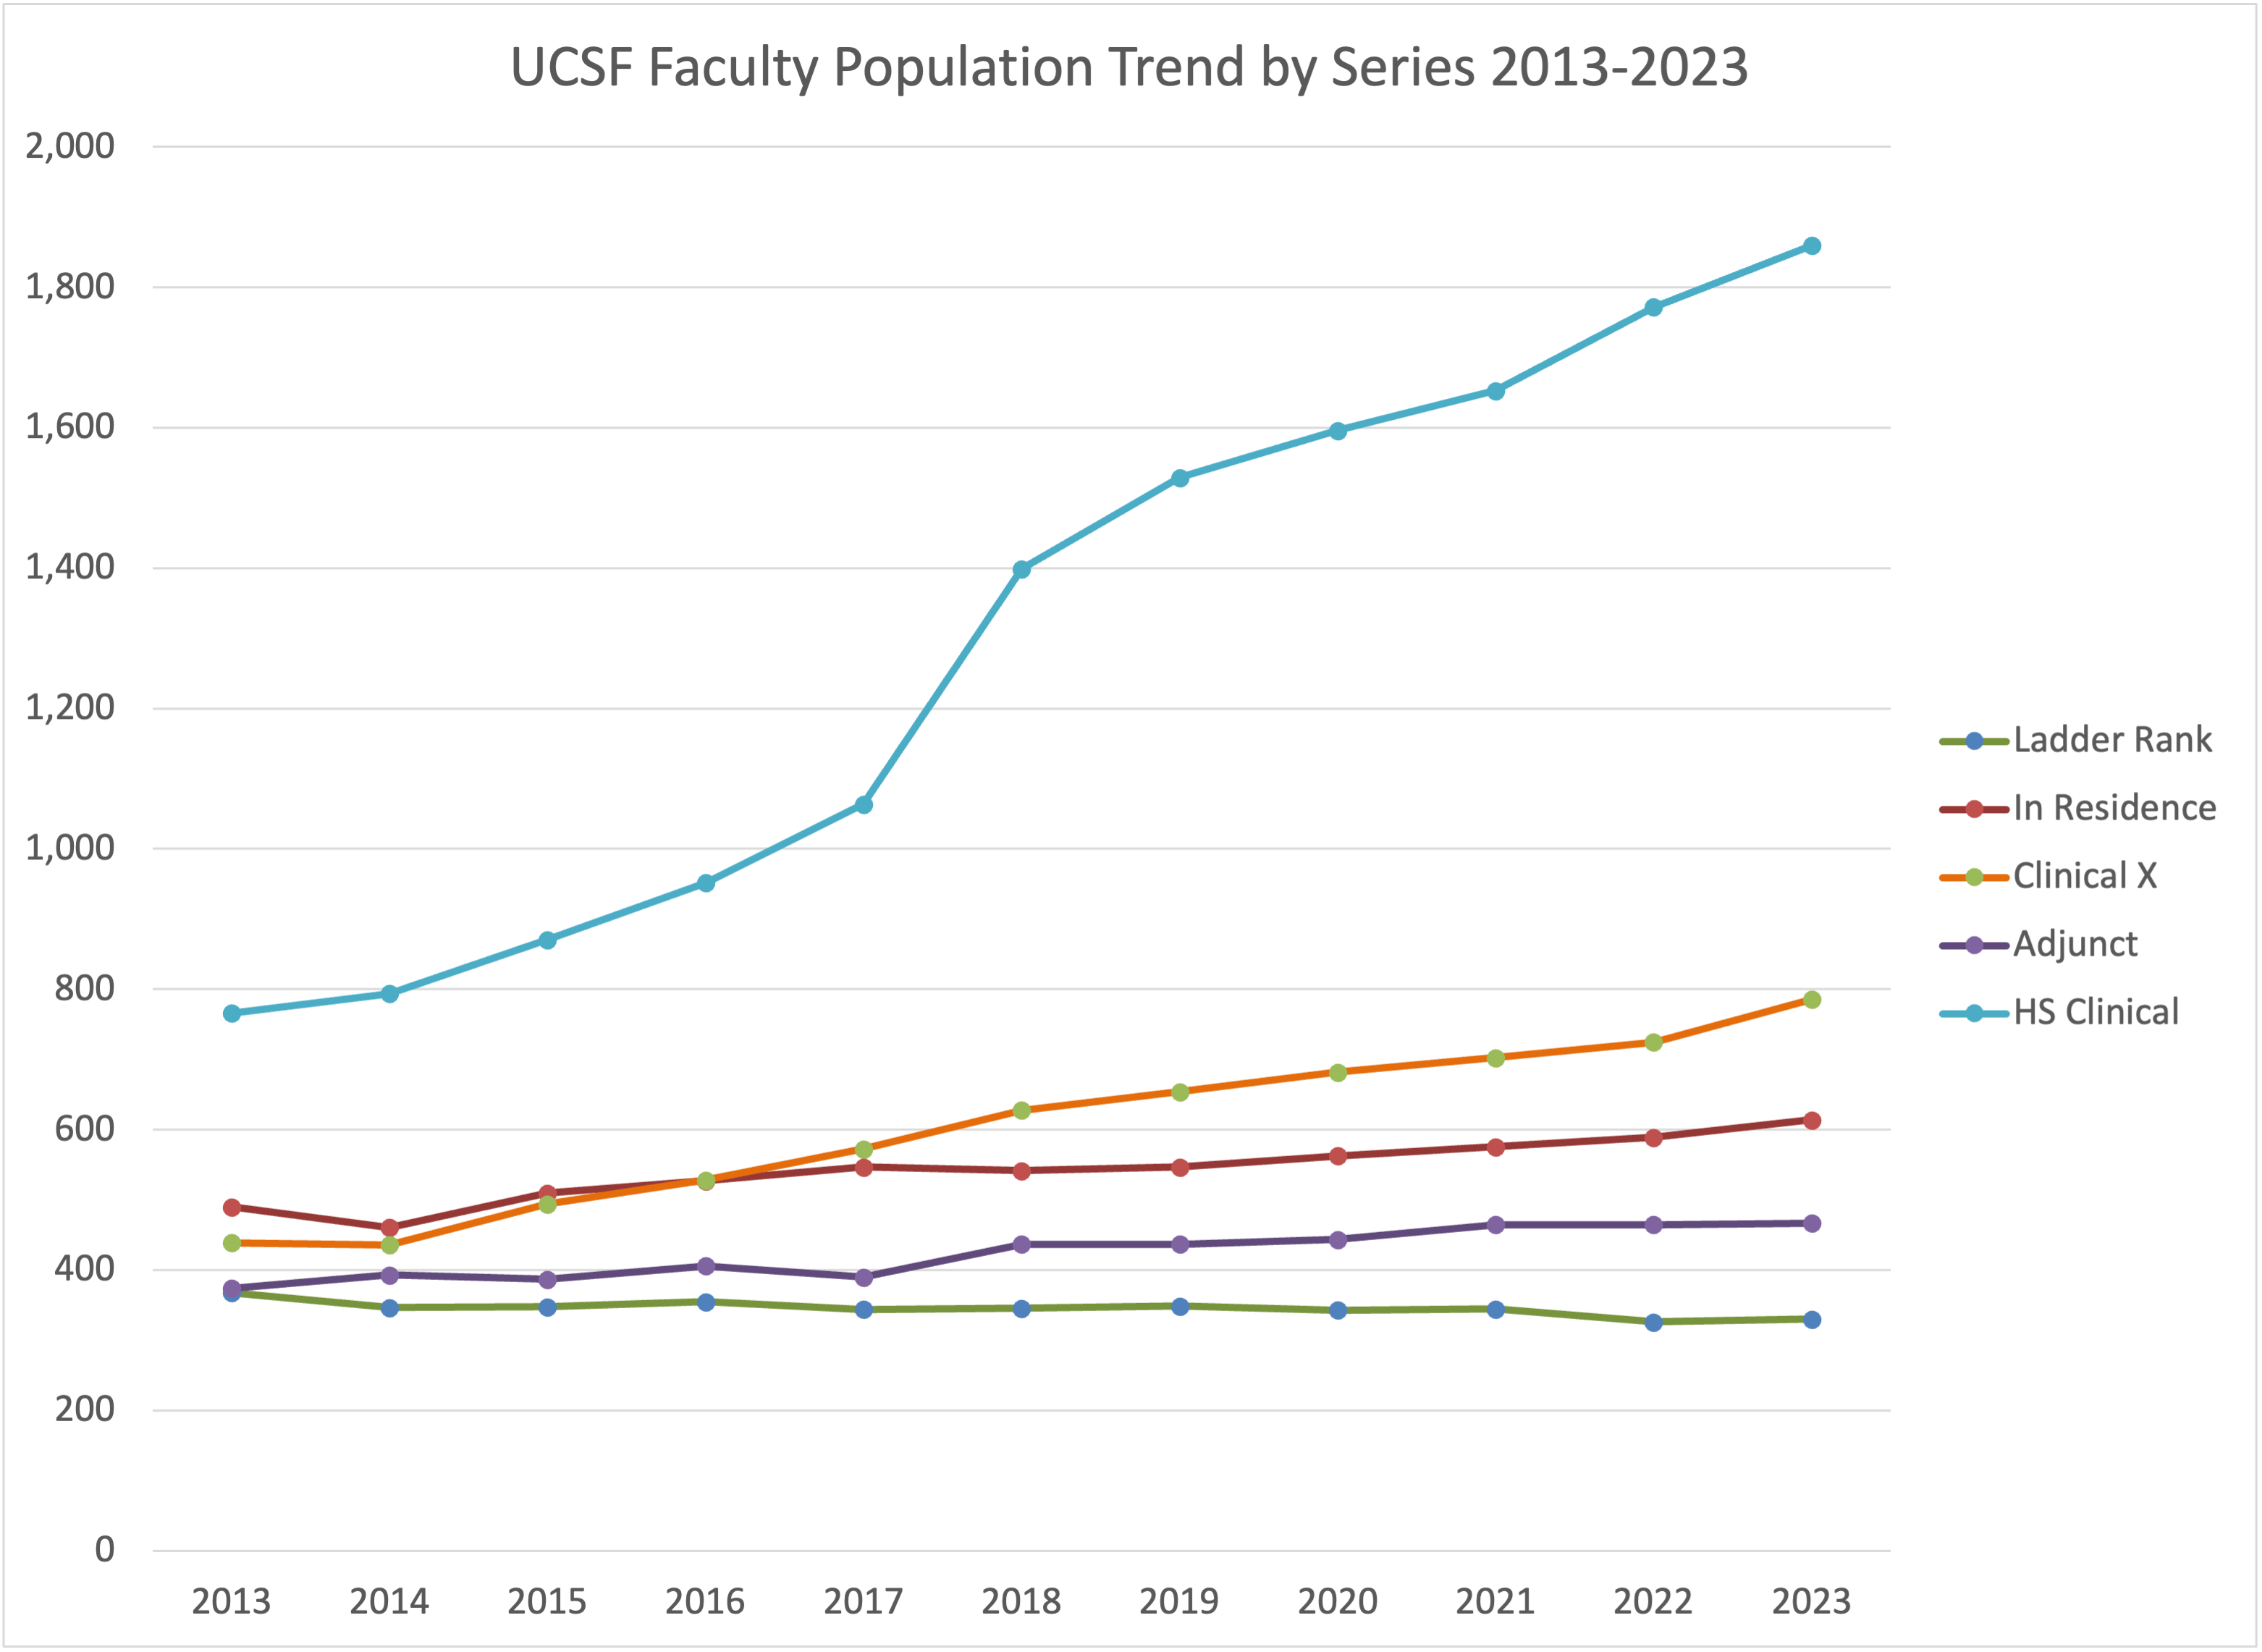 UCSF Facuty Population Trend by Series Line 2013-2023